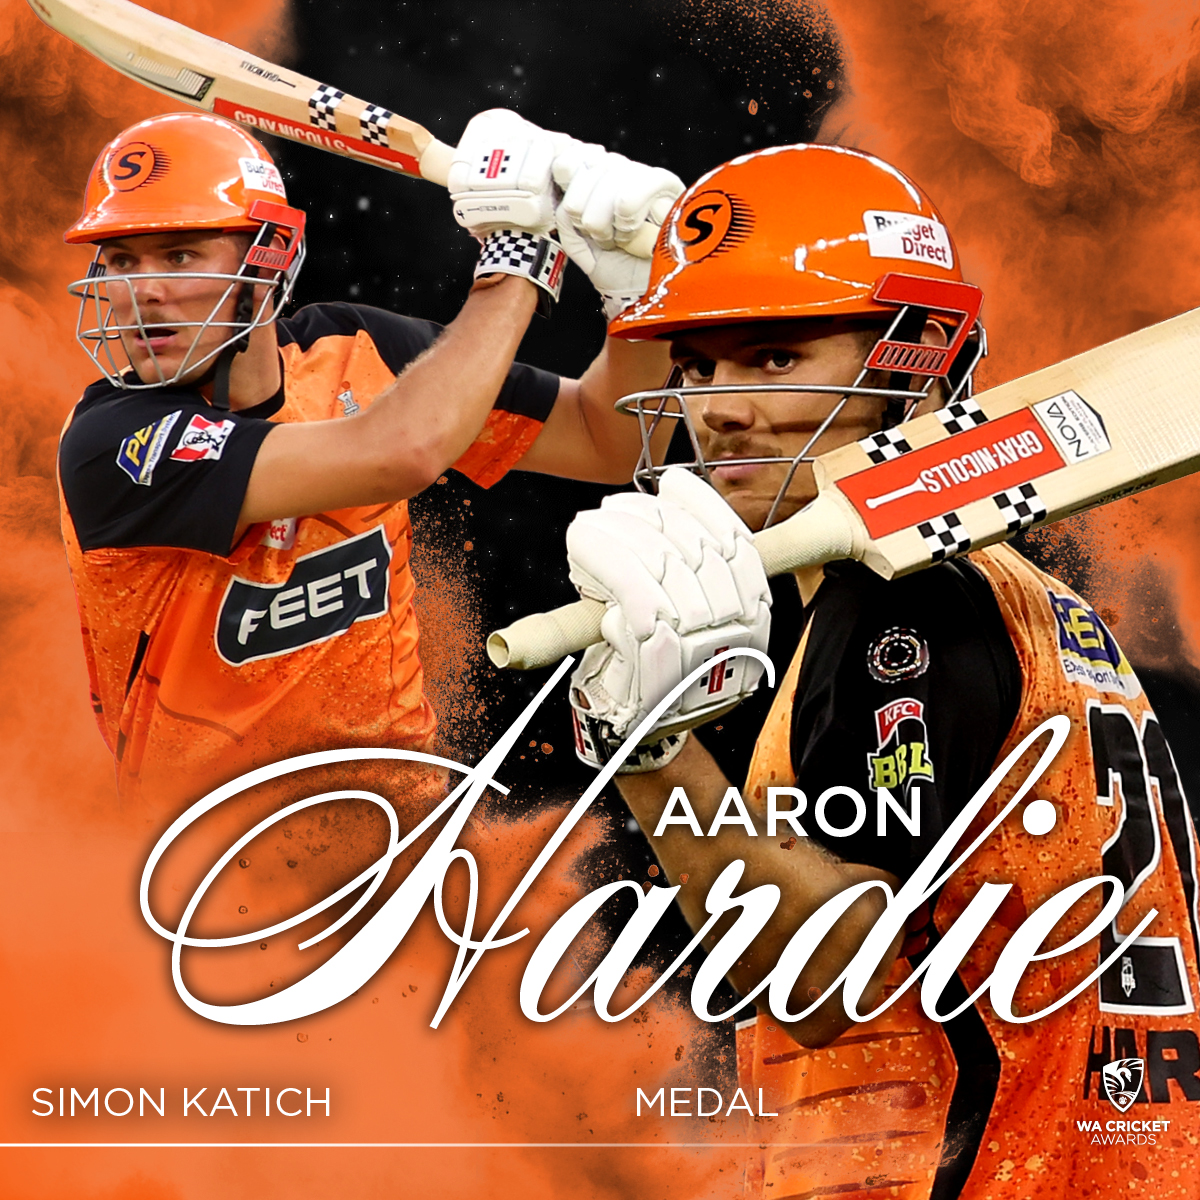 Destructive. Dependable. Daring. Our Skipper led from the front this #BBL season, a worthy winner of this year's Simon Katich Medal 🔥 #WACricketAwards #MADETOUGH